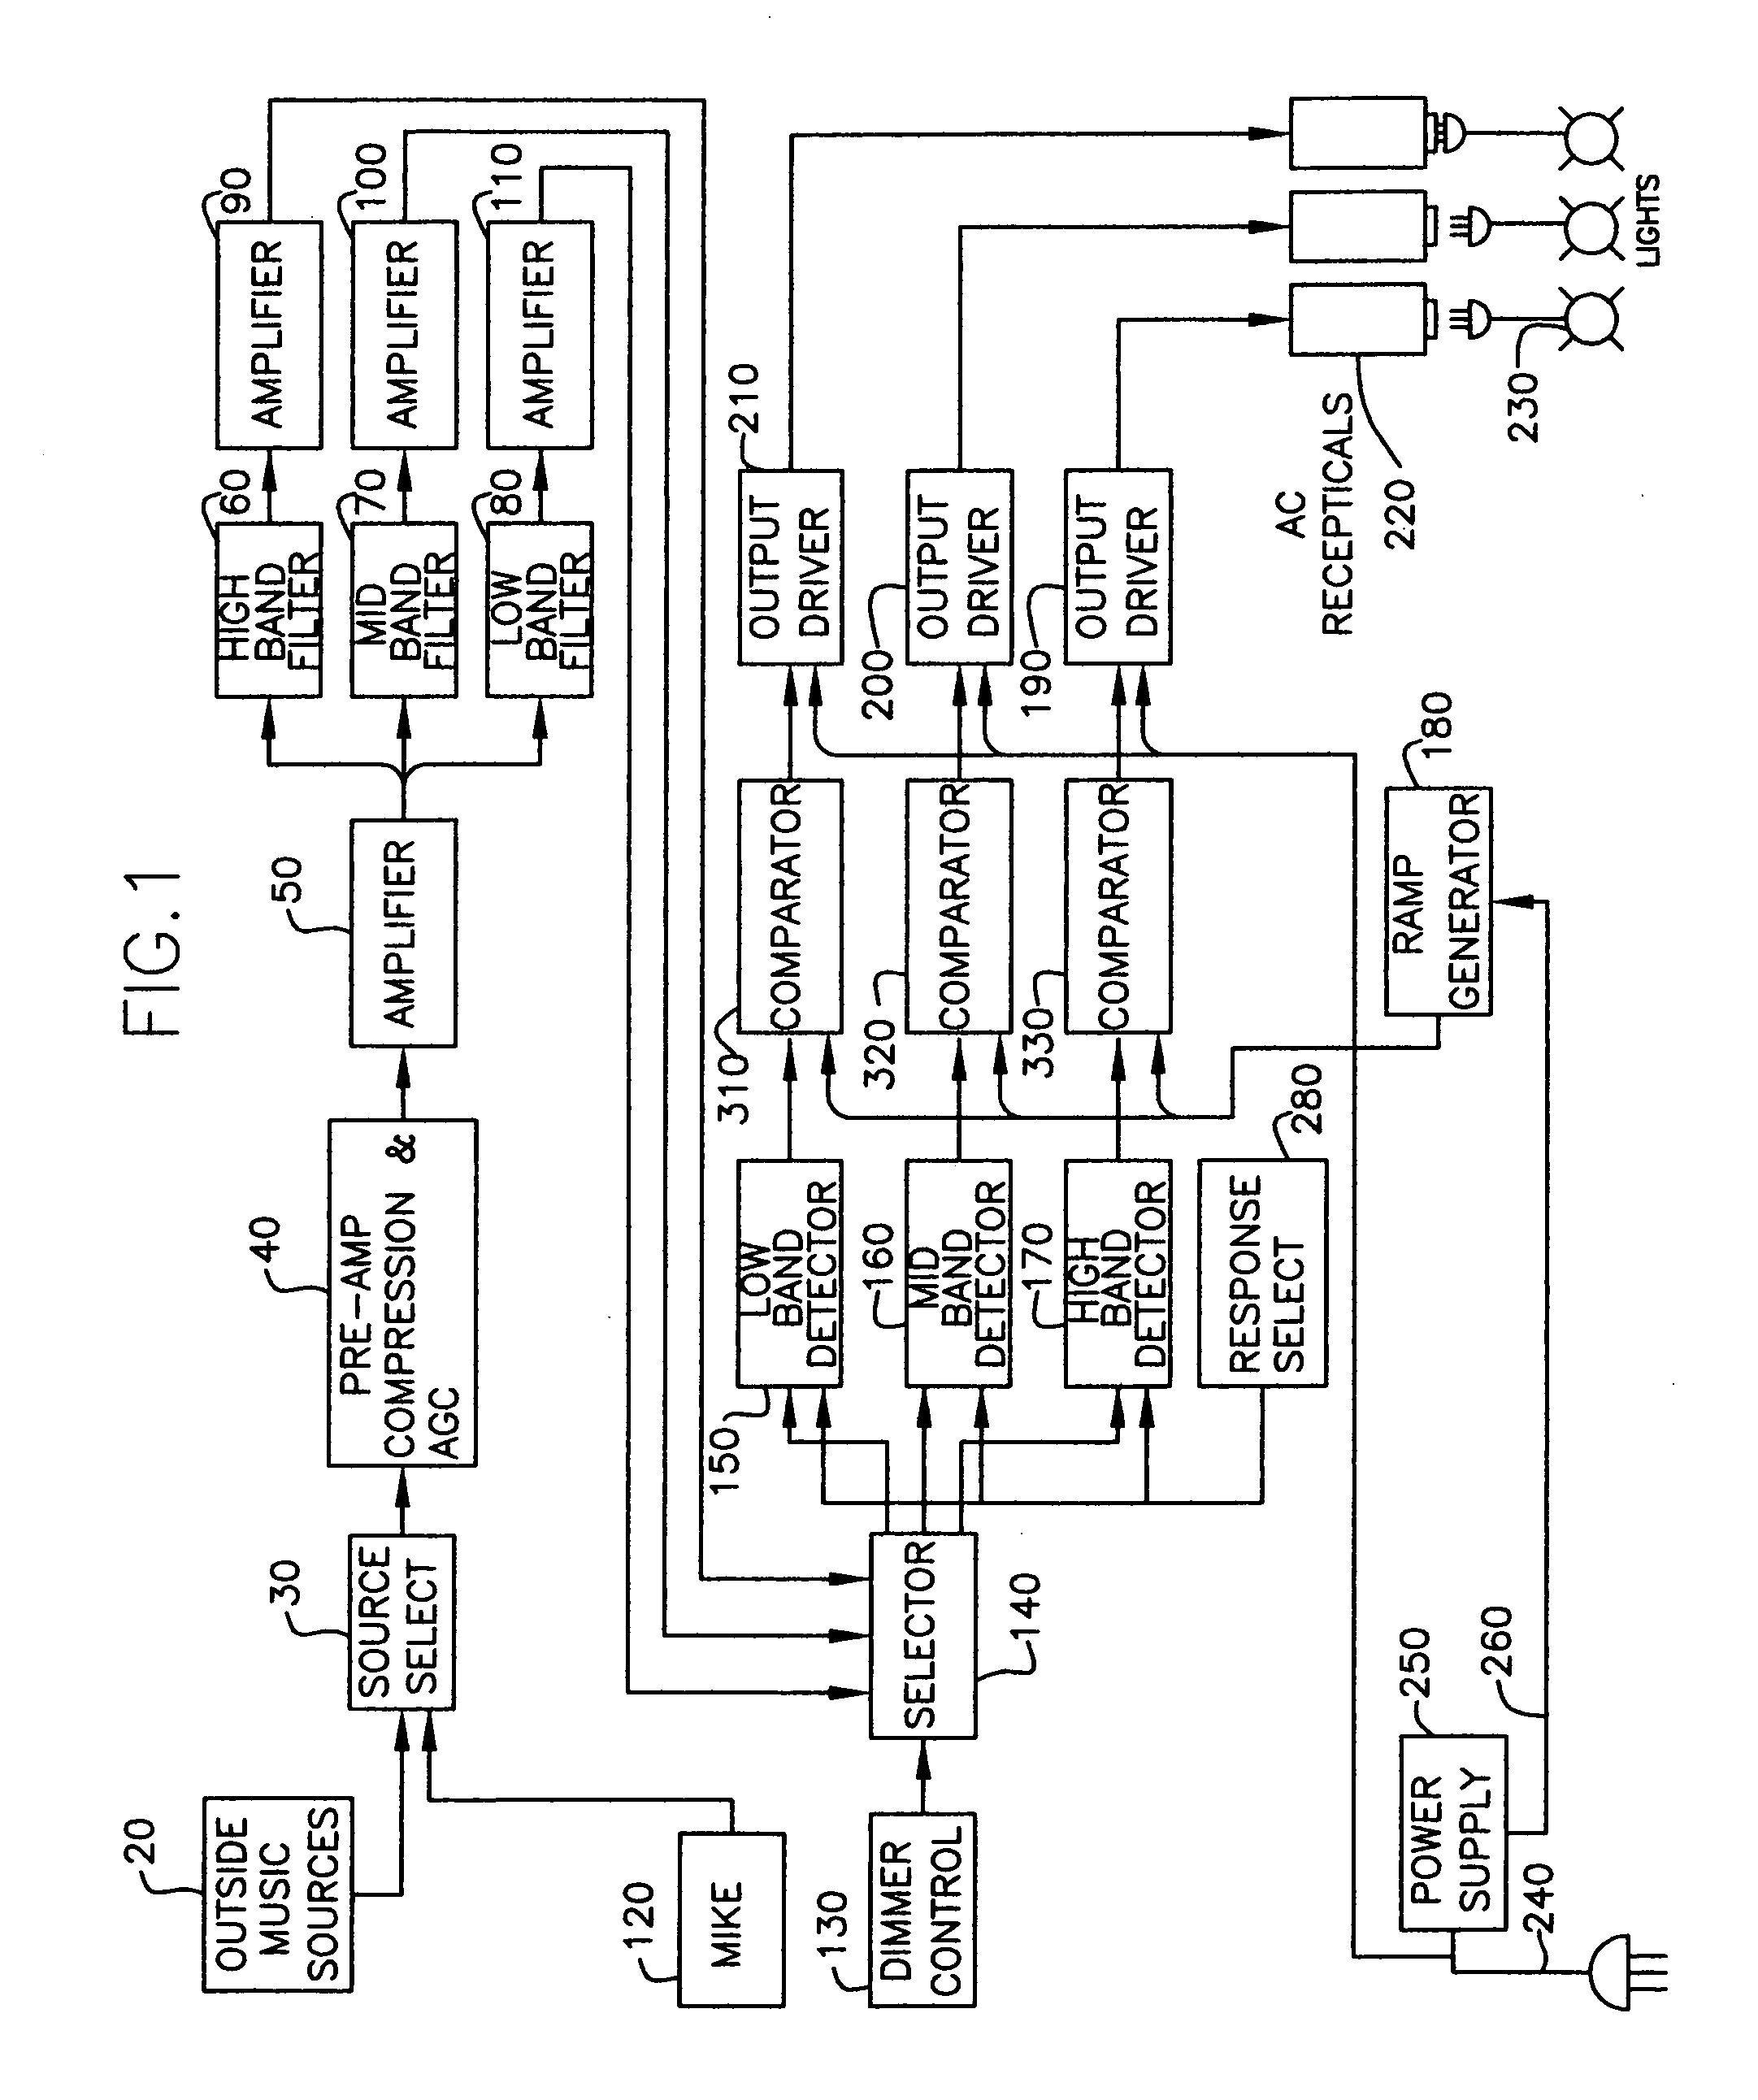 Method of and apparatus for controlling a source of light in accordance in a source of sound